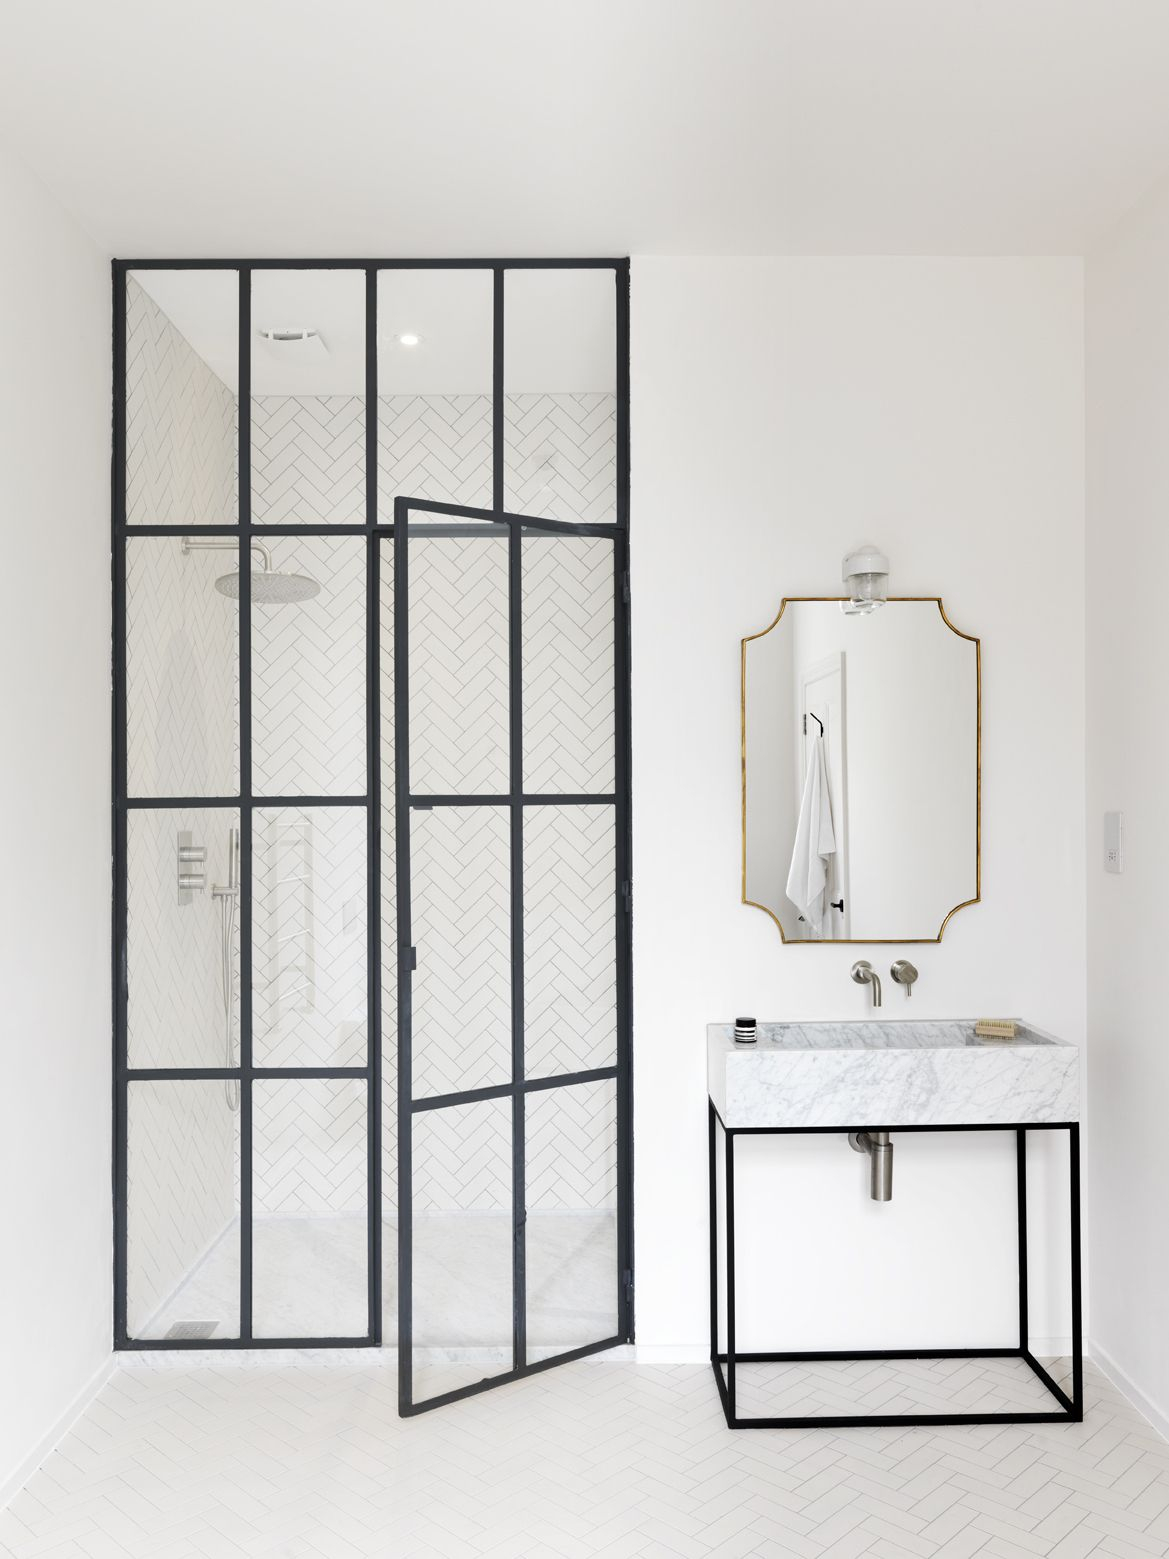 Bathroom Of The Week Steel Frame Shower Doors In A Fanciful London intended for sizing 1169 X 1559